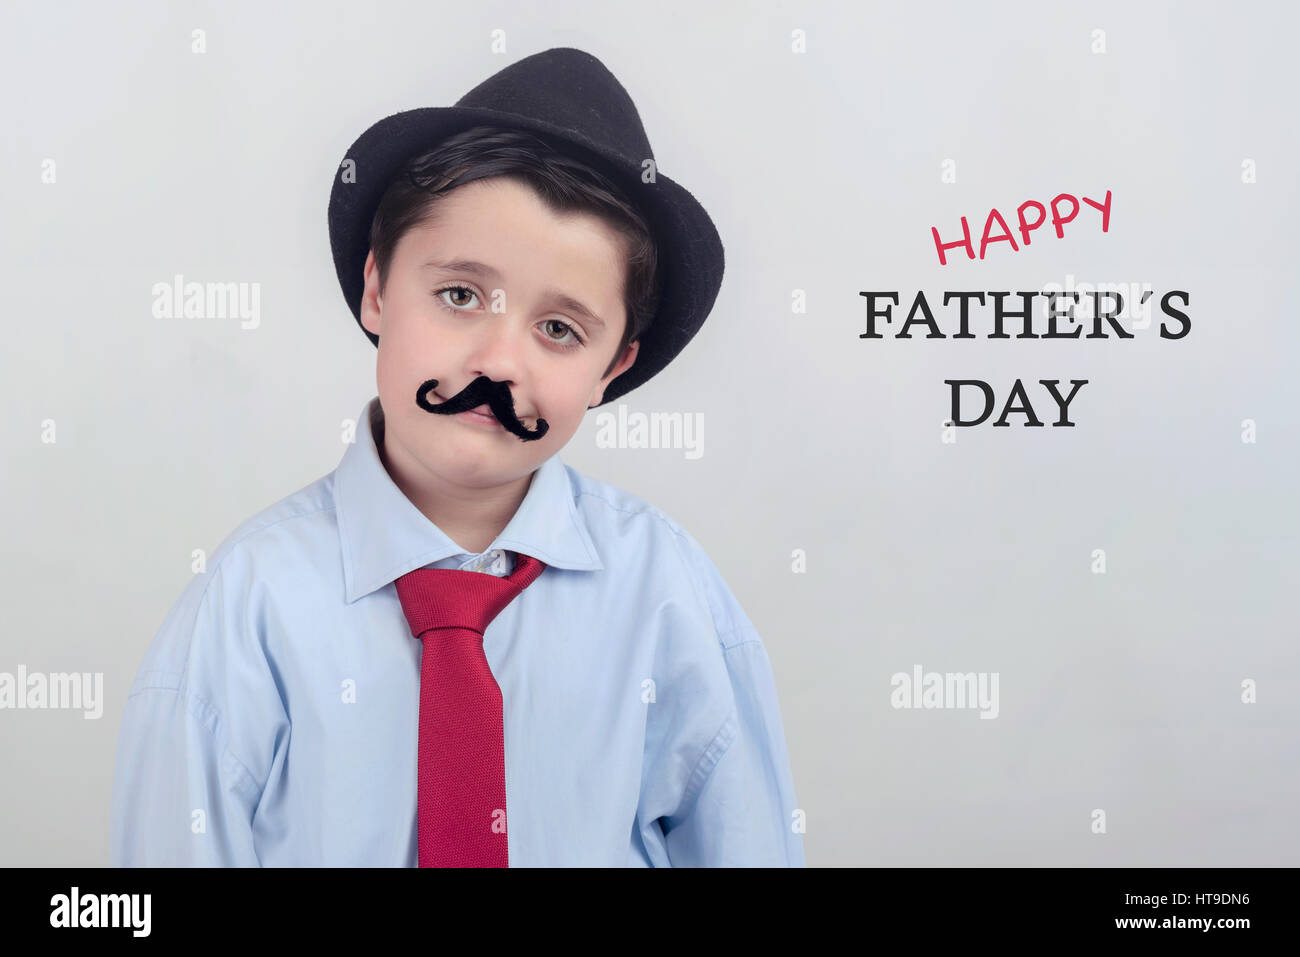 Happy father's day Stock Photo